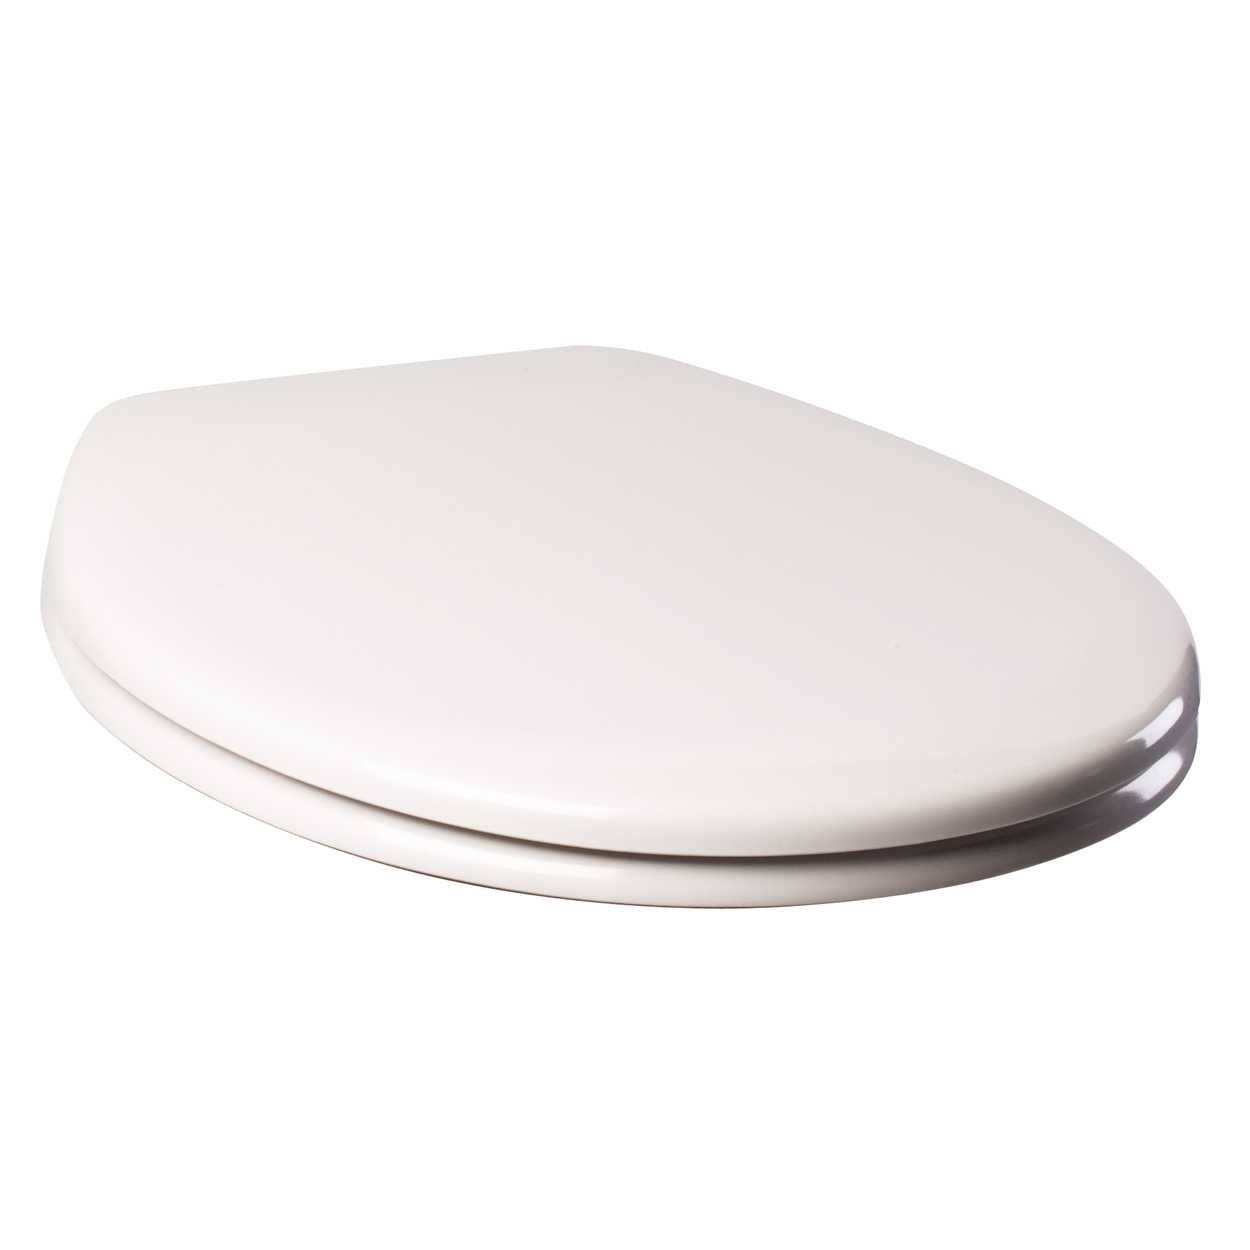 EuroShowers Opal Deluxe Toilet Seat - White, Soft Close